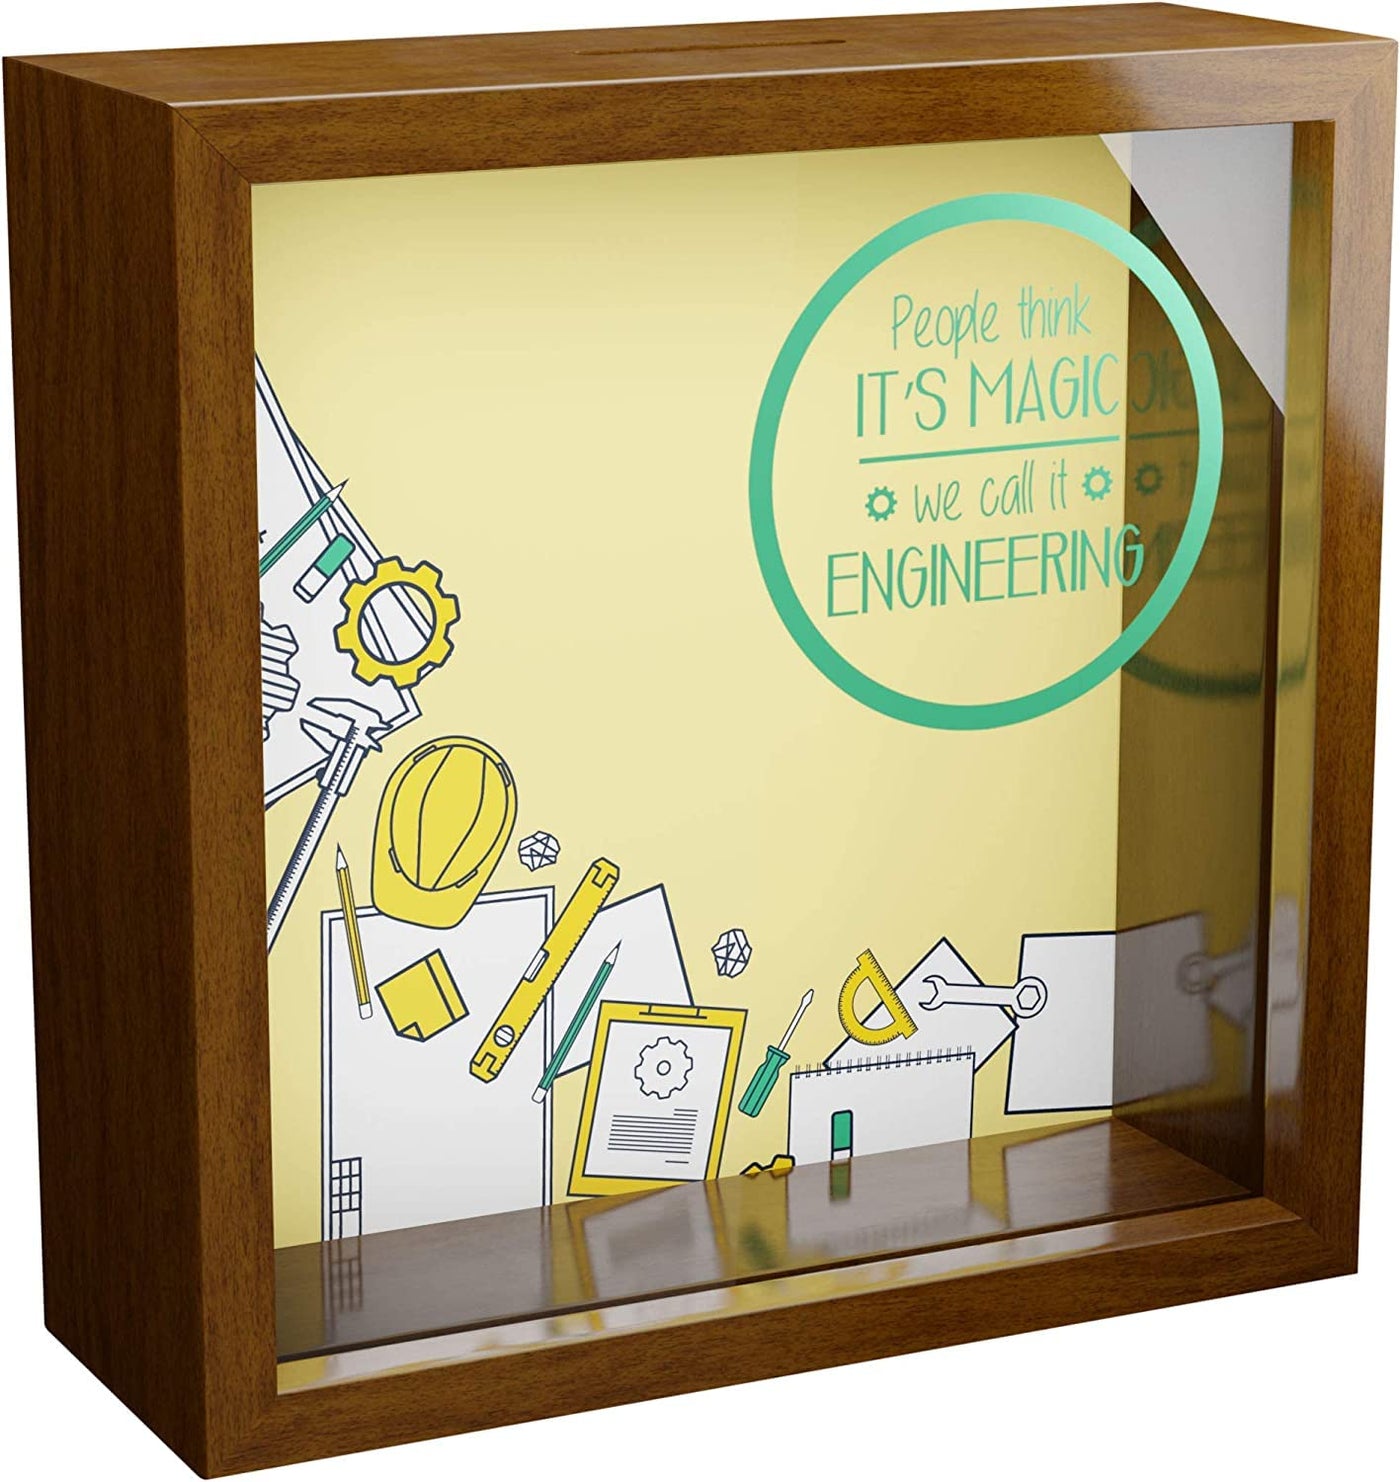 Engineer"Noun-Other People Don't Care About" Shadow Box Wall Decor -6x6x2" Wooden Engineering Themed Display Case -Fun Keepsake Piggy Bank Gift for Home, Office, Work, Dorm Decoration! (engineer)